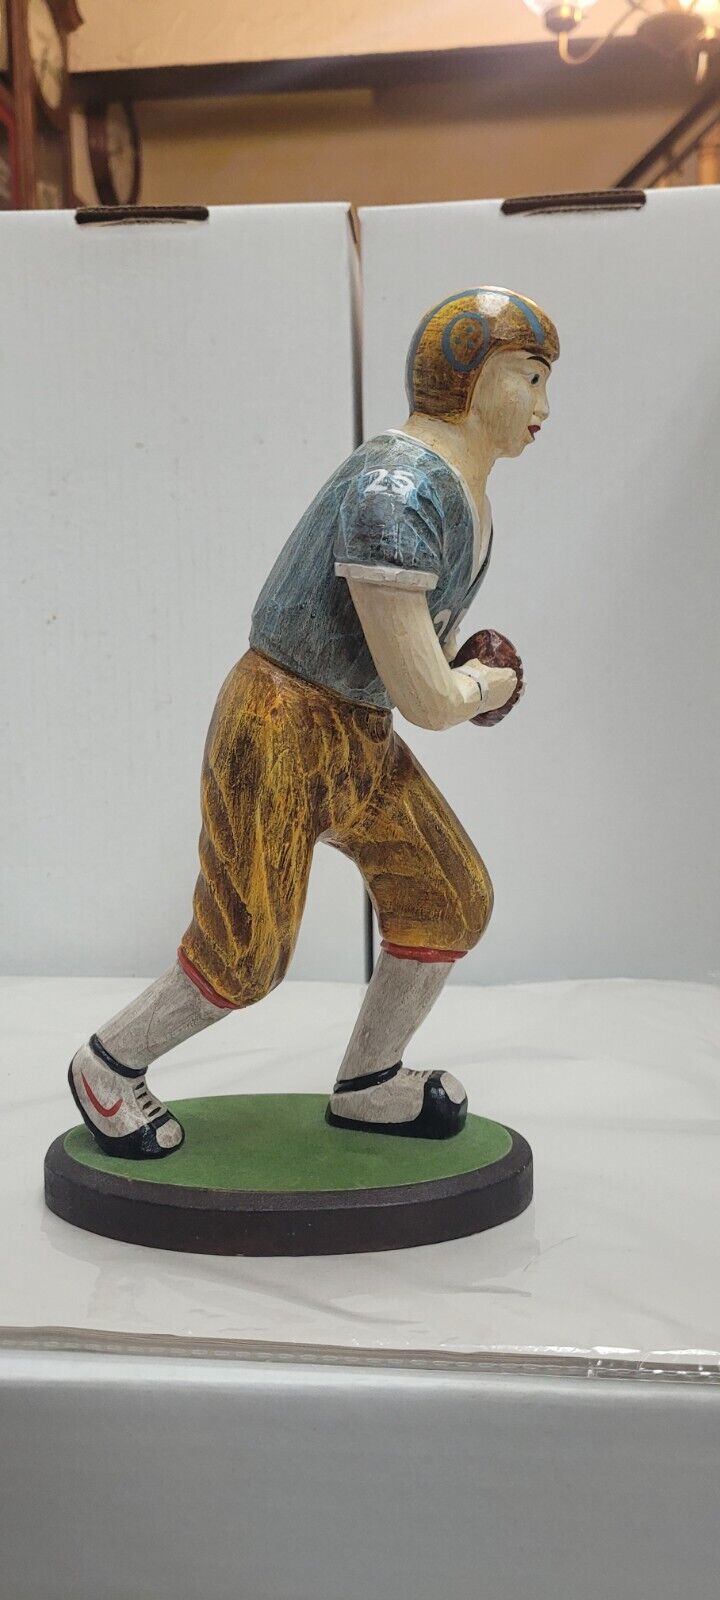 Handcarved Wooden Painted Football Man Statue